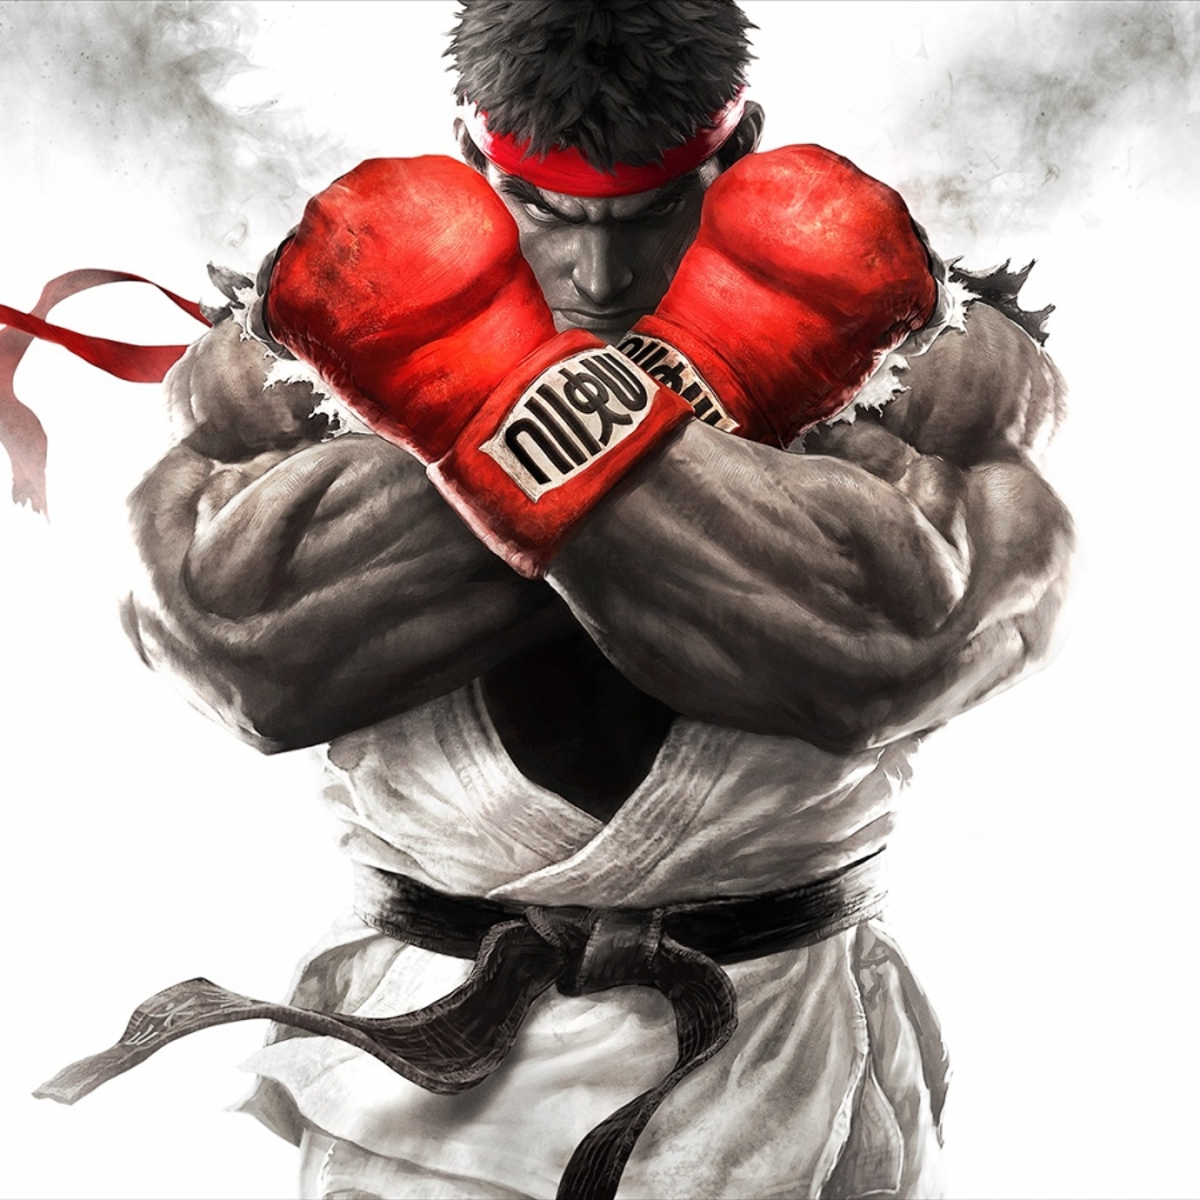 Street Fighter 5 guide: all moves, all characters, tips and tactics